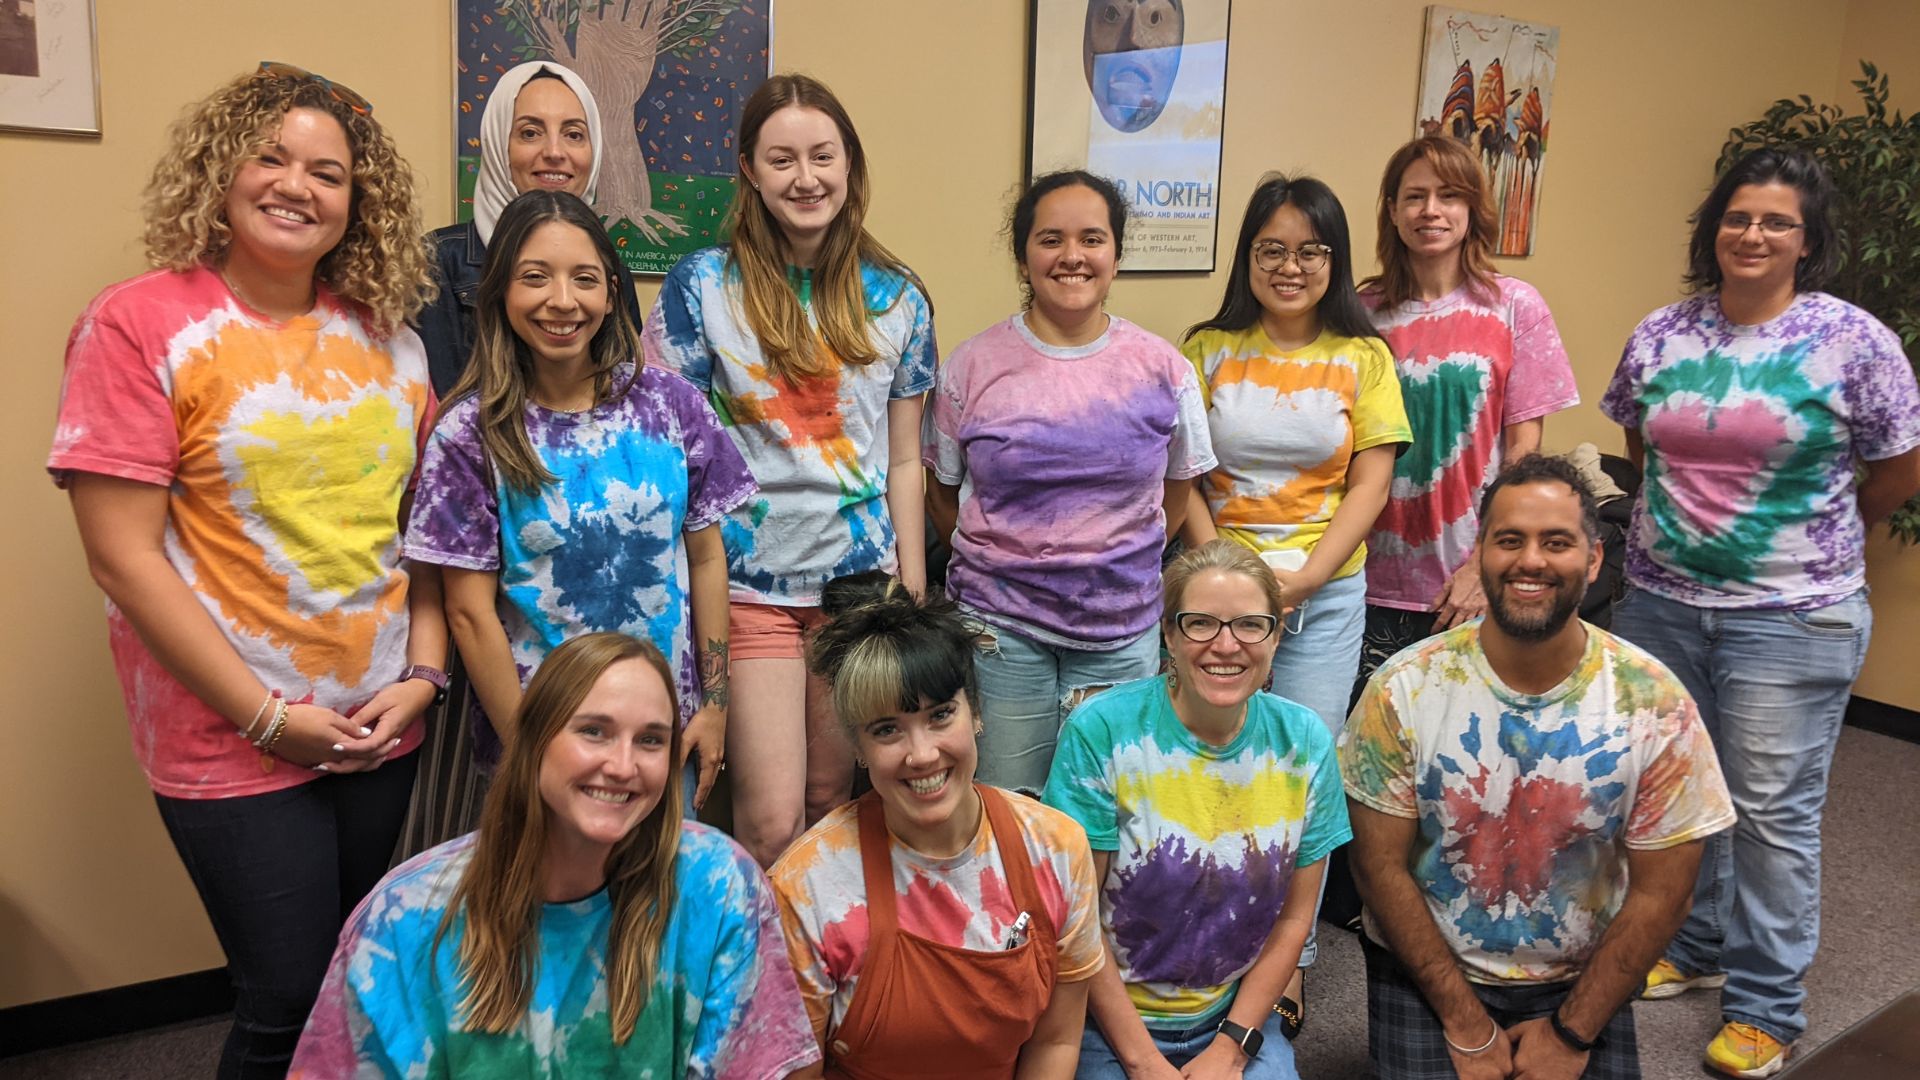 Group photo of MSW and PHD students who participated in the Dive Into Action Reseach Training. They are all wearing tie-dyed shirts.